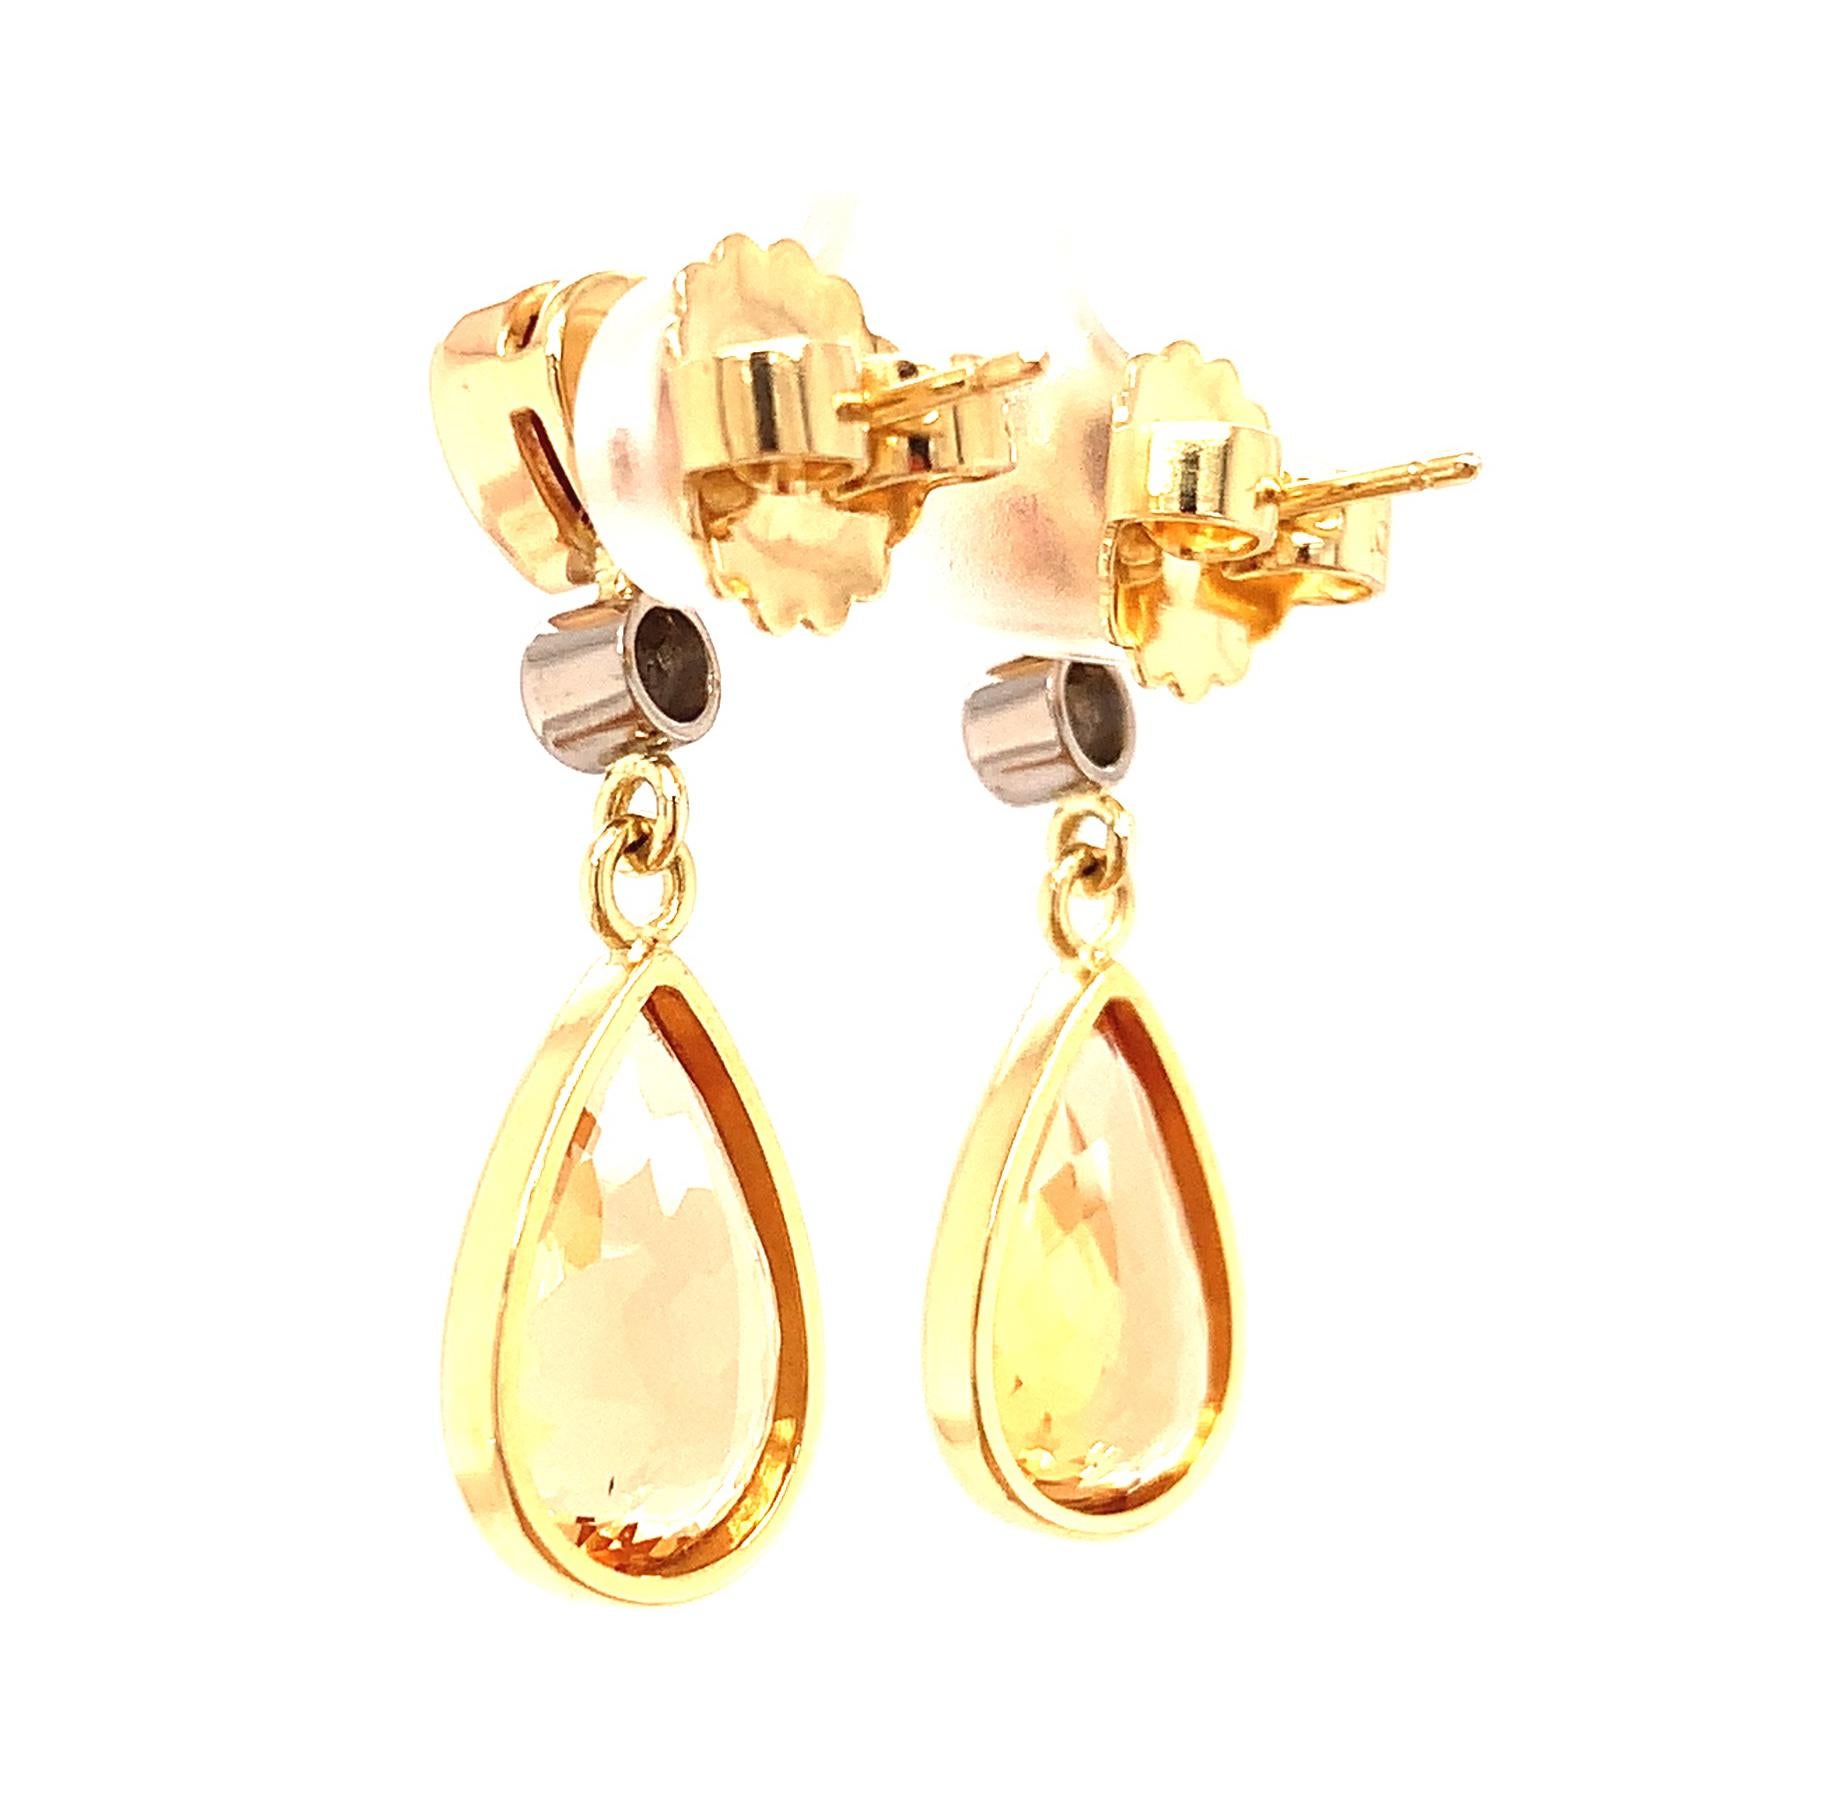 Pear Cut Precious Topaz and Garnet Drop Earrings 18K Yellow Gold, 9.74 Carats Total  For Sale